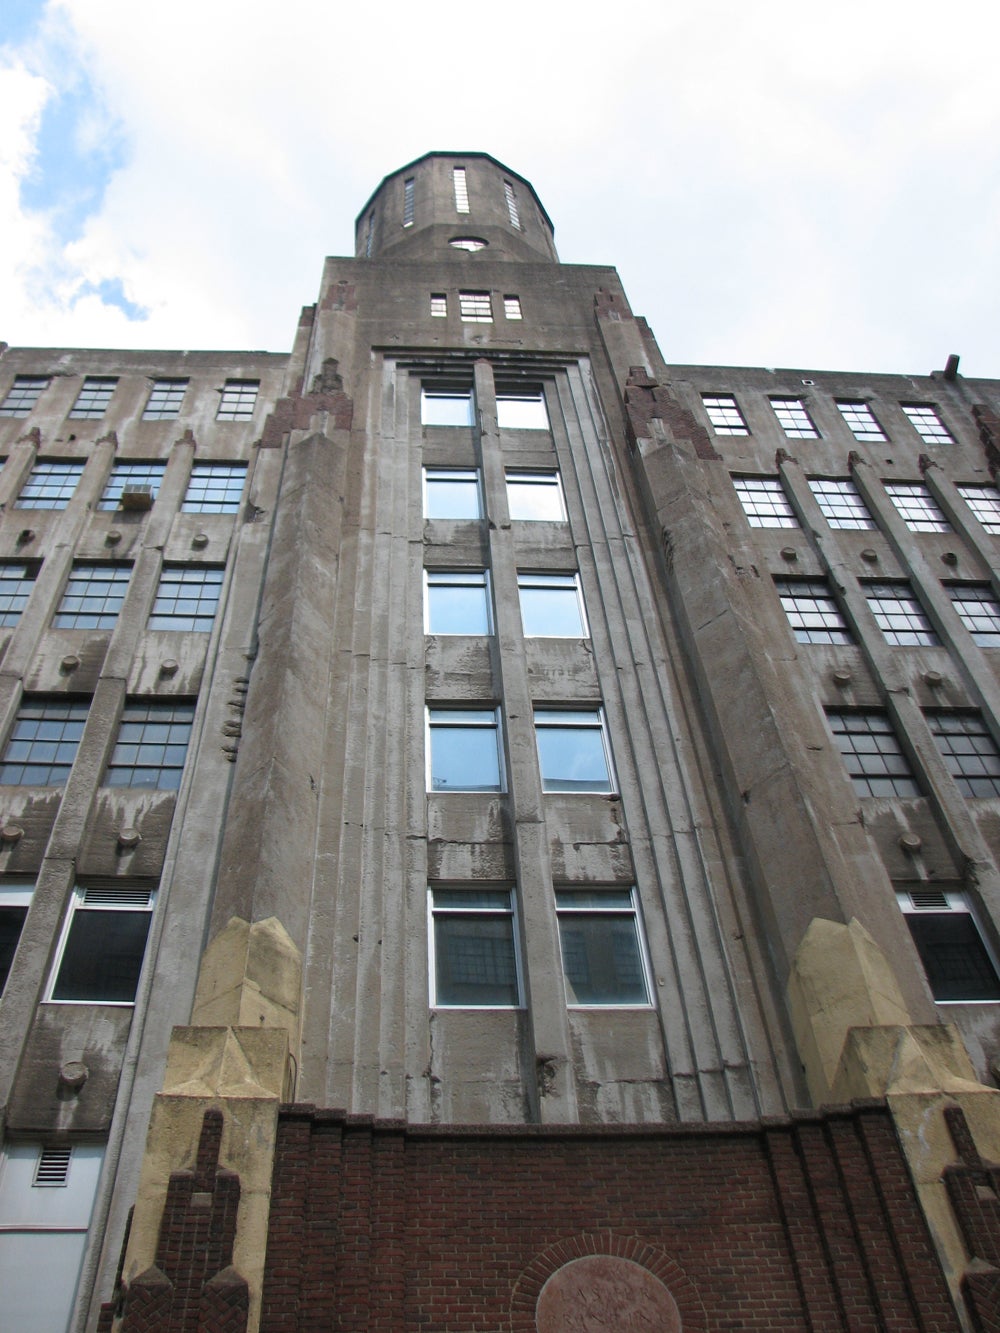 Philip Tyre’s Lasher Building is topped with a cylindrical lantern – the concrete beacon of Callowhill.